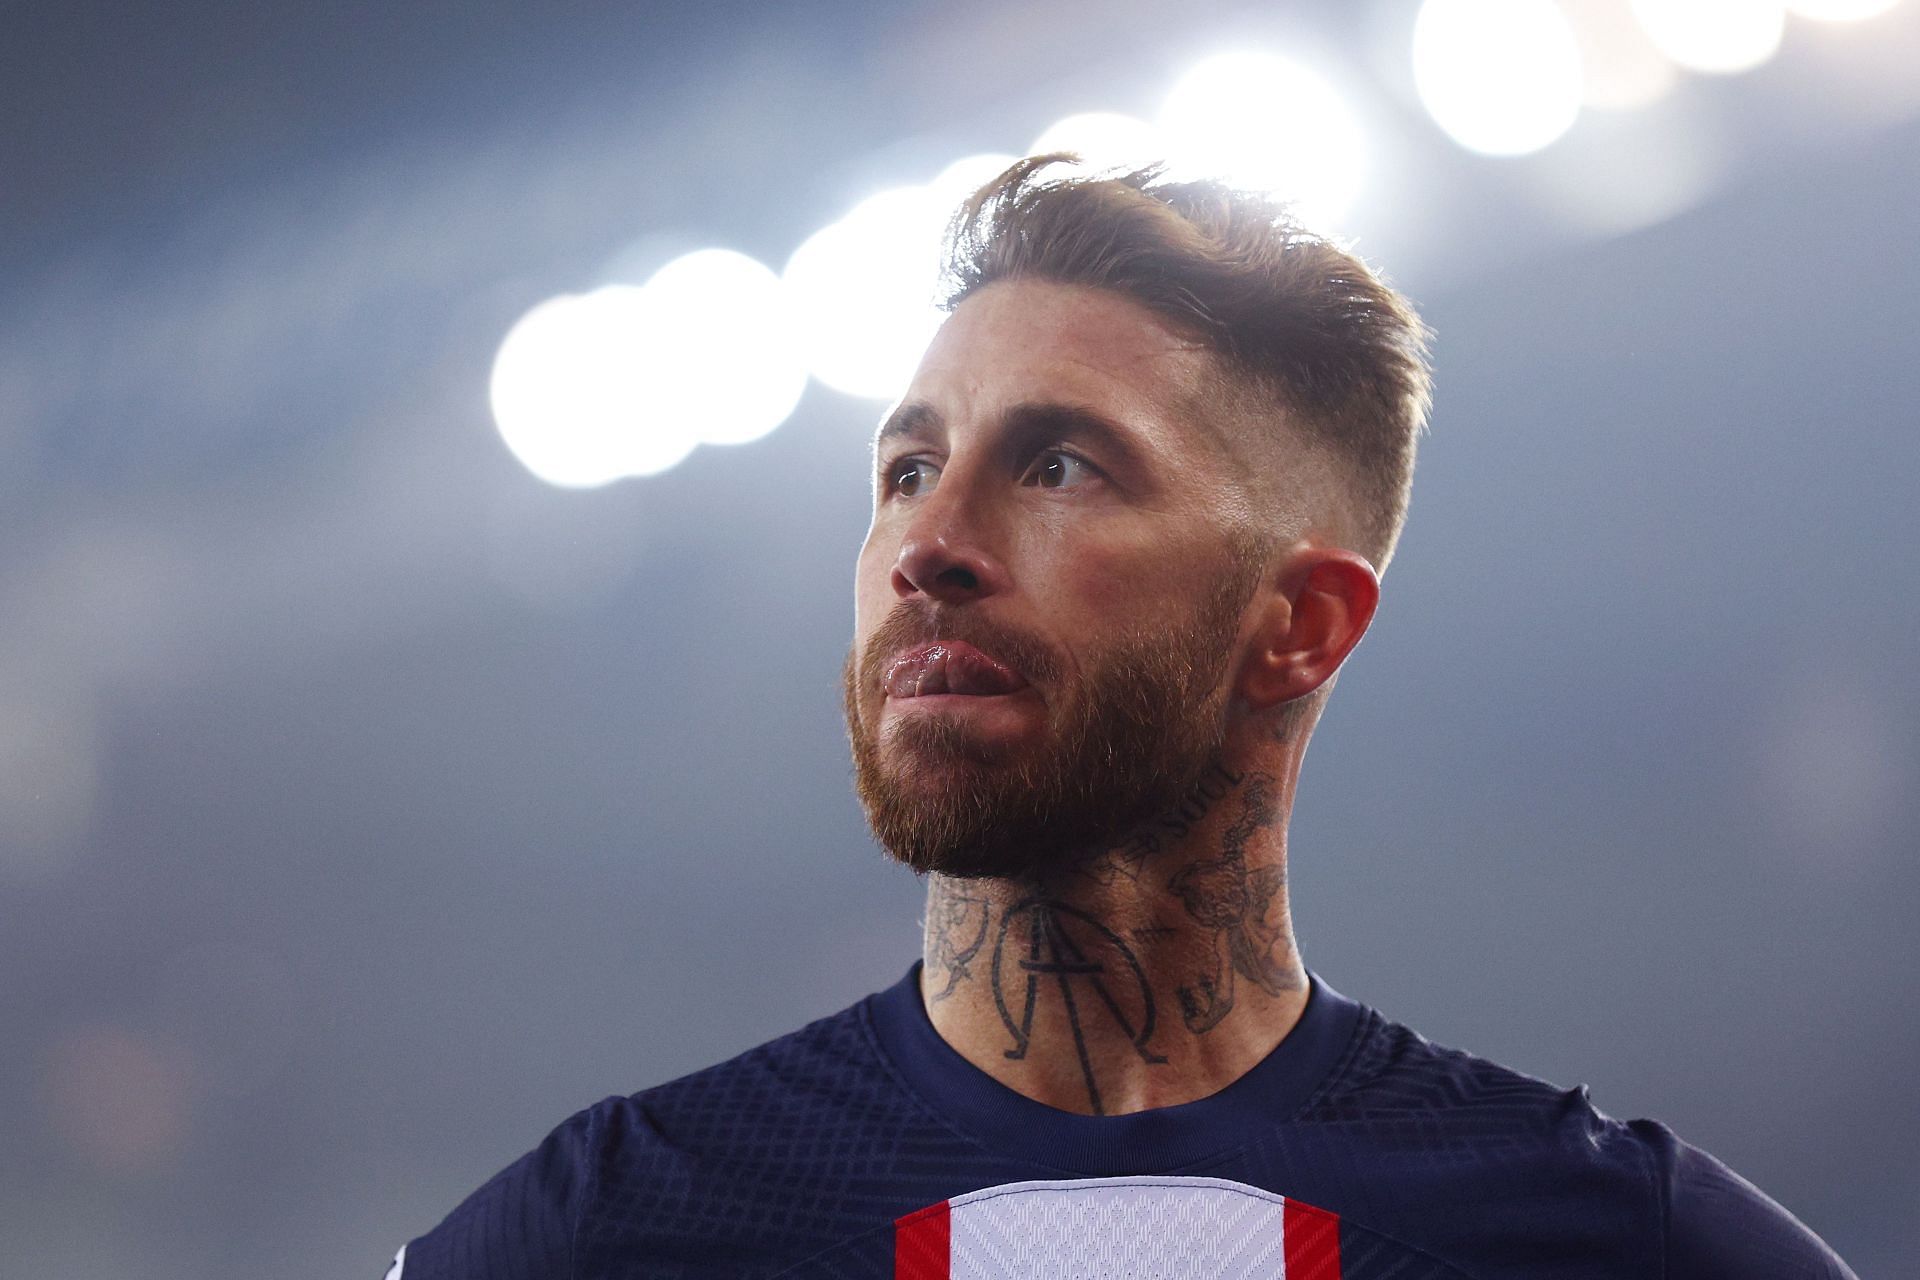 Paris Saint-Germain defender Sergio Ramos was a force to be reckoned with during his time with Real Madrid